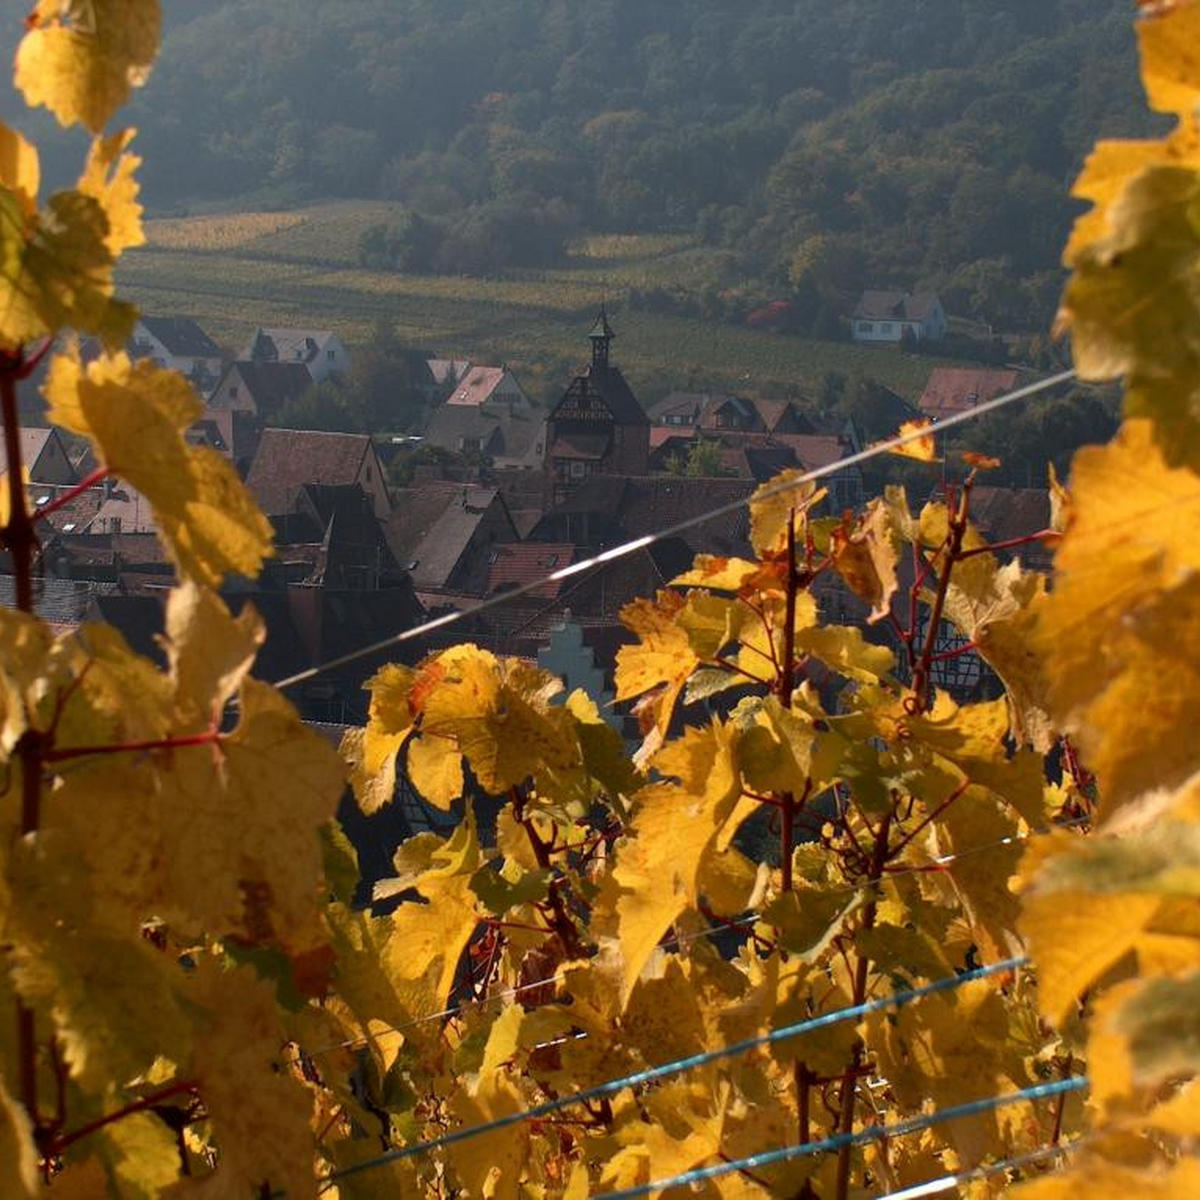 A photograph taken at the top of Hugel vineyards in autumn, showing the village below through a frame of golden vine leaves